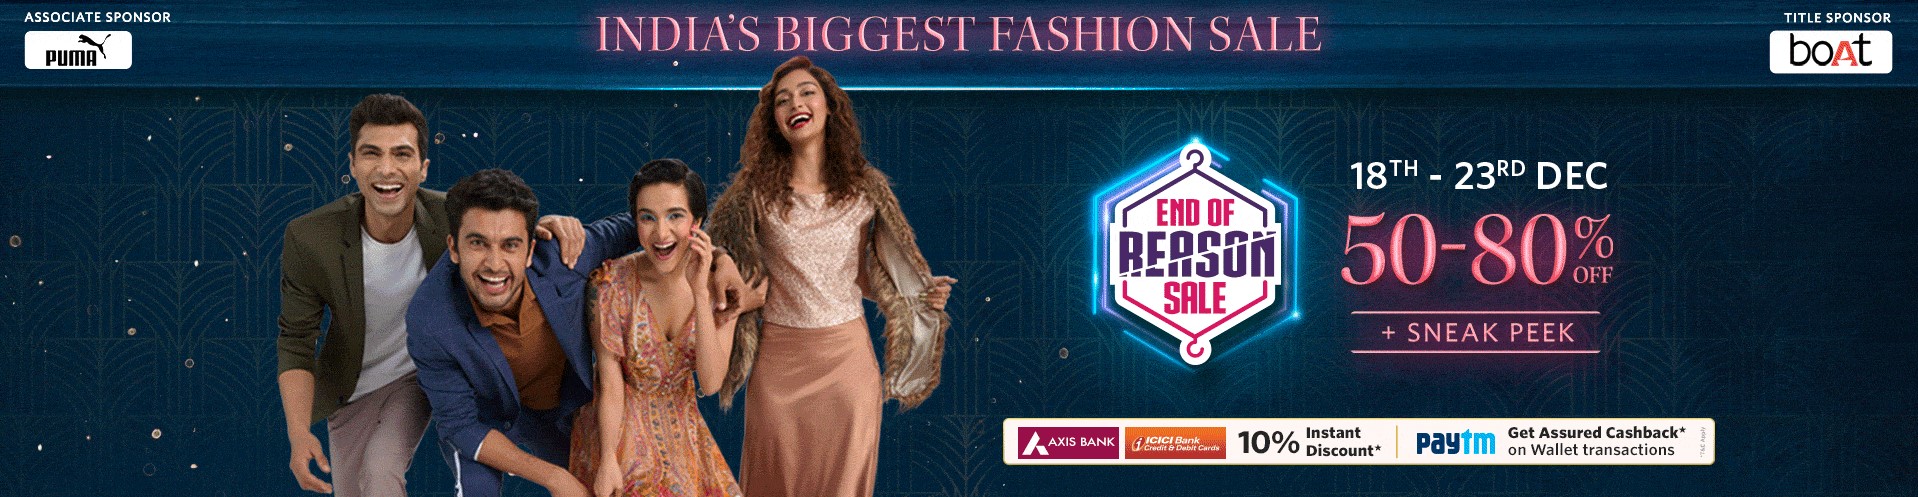 Myntra End Of Reason Sale | Get up to 80% off on fashion